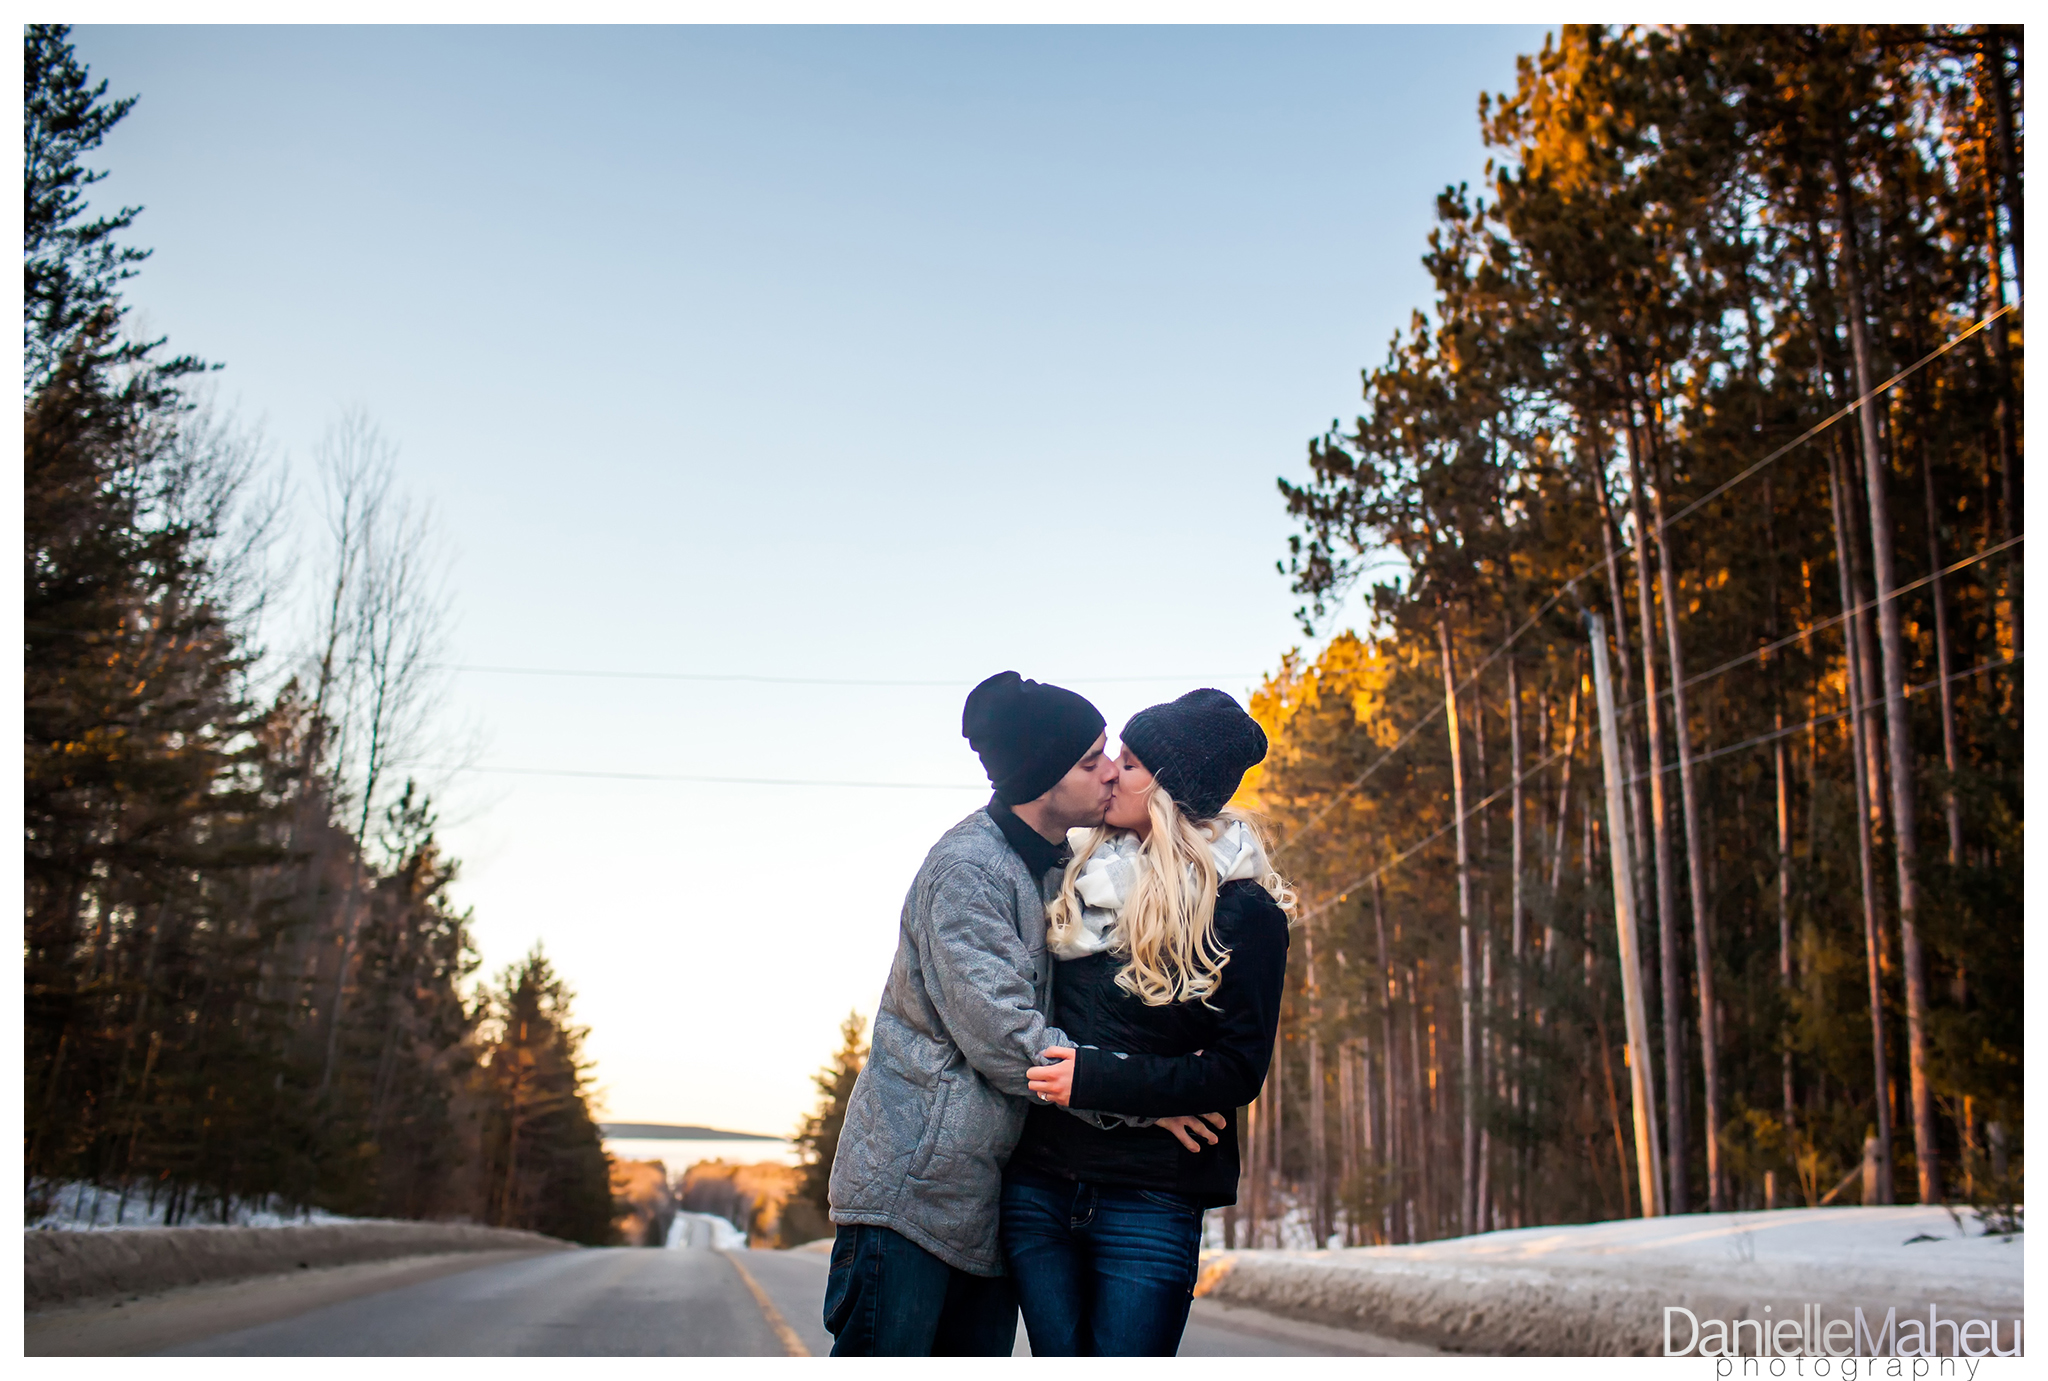 Engage couple embrace in winter near a county road